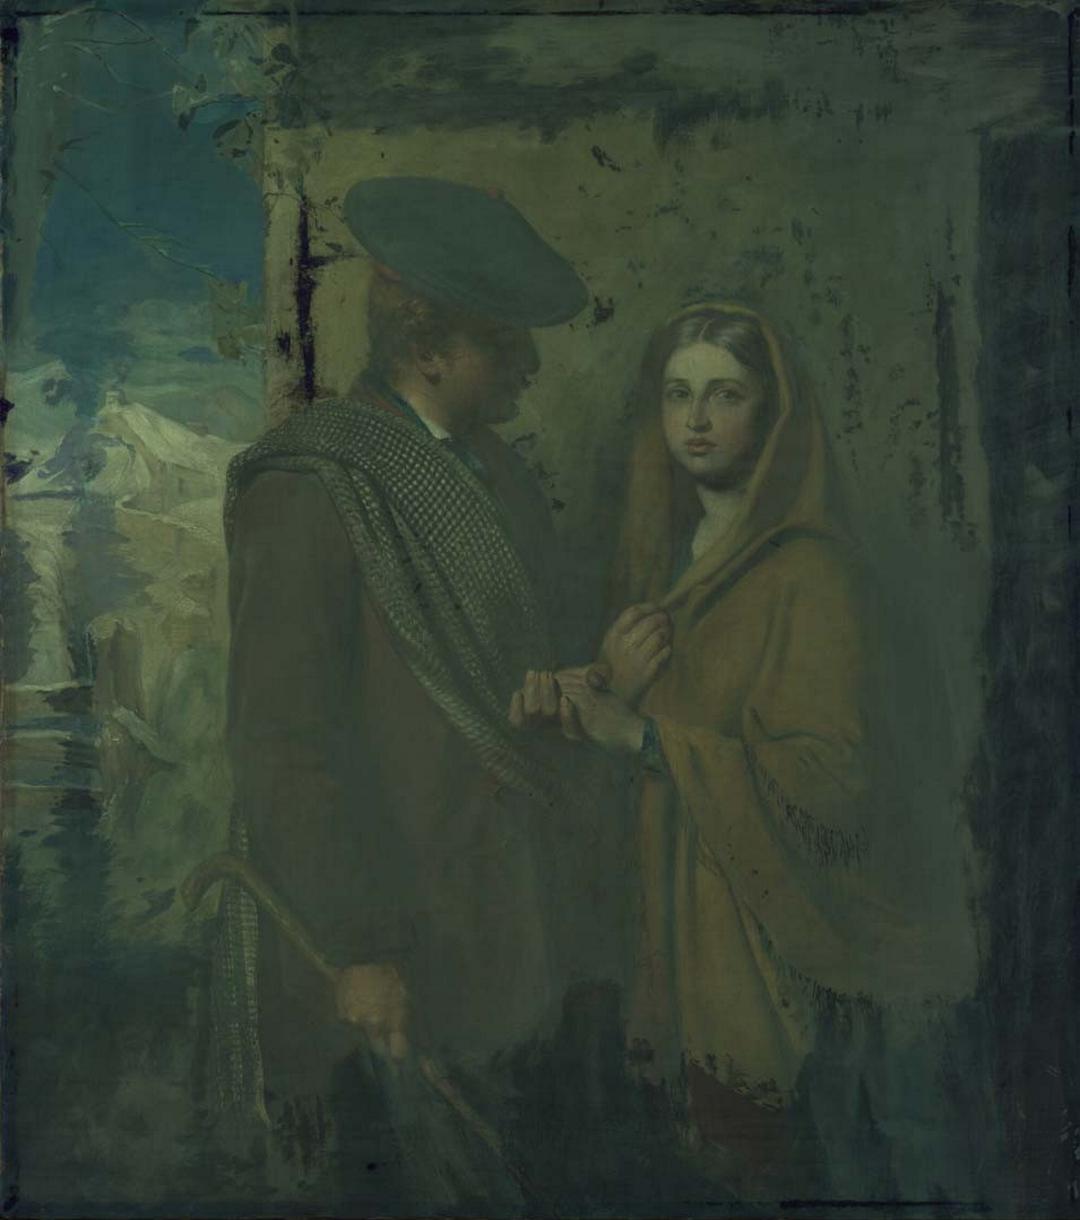 An oil painting of young Scottish lovers holding hands by a doorway, the man looking at the woman who faces towards the viewer while clutching her shawl, photographed under UV light.